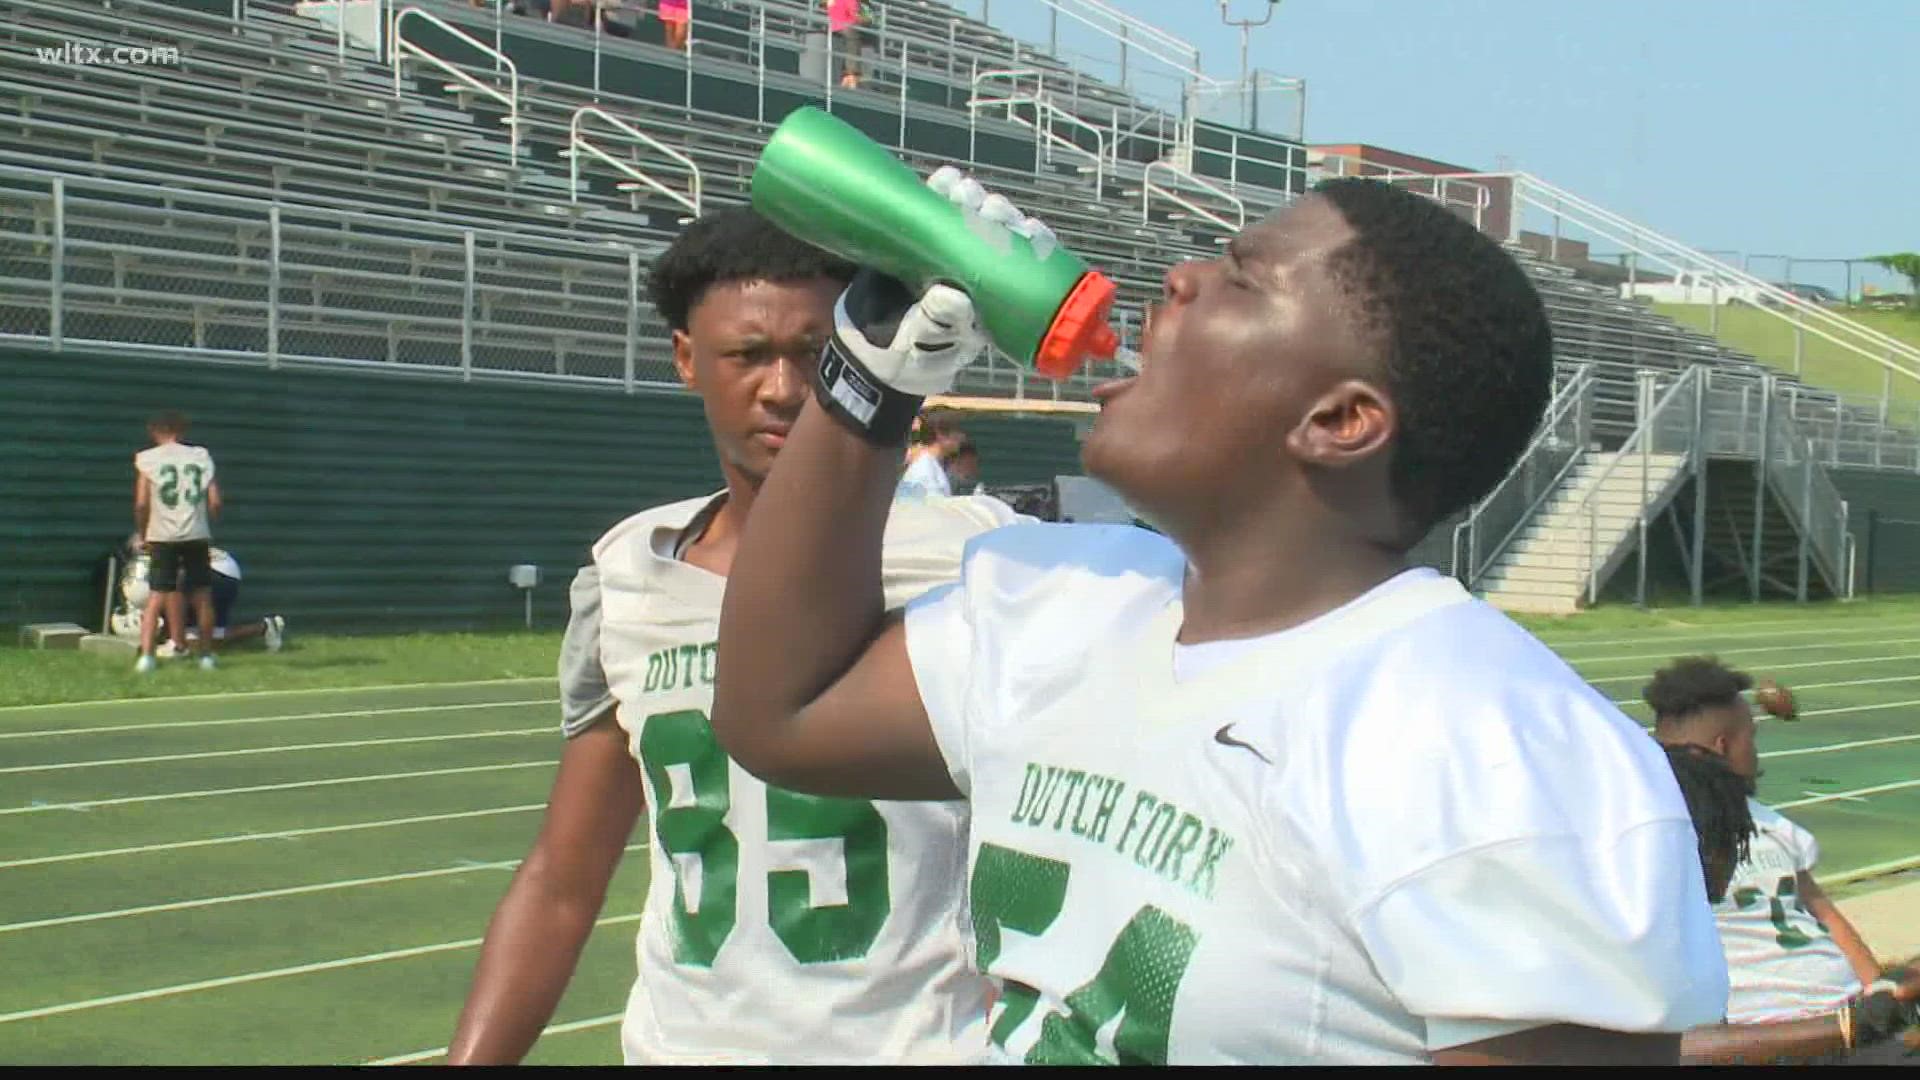 Dutch Fork High School eyes 6 consecutive state championships